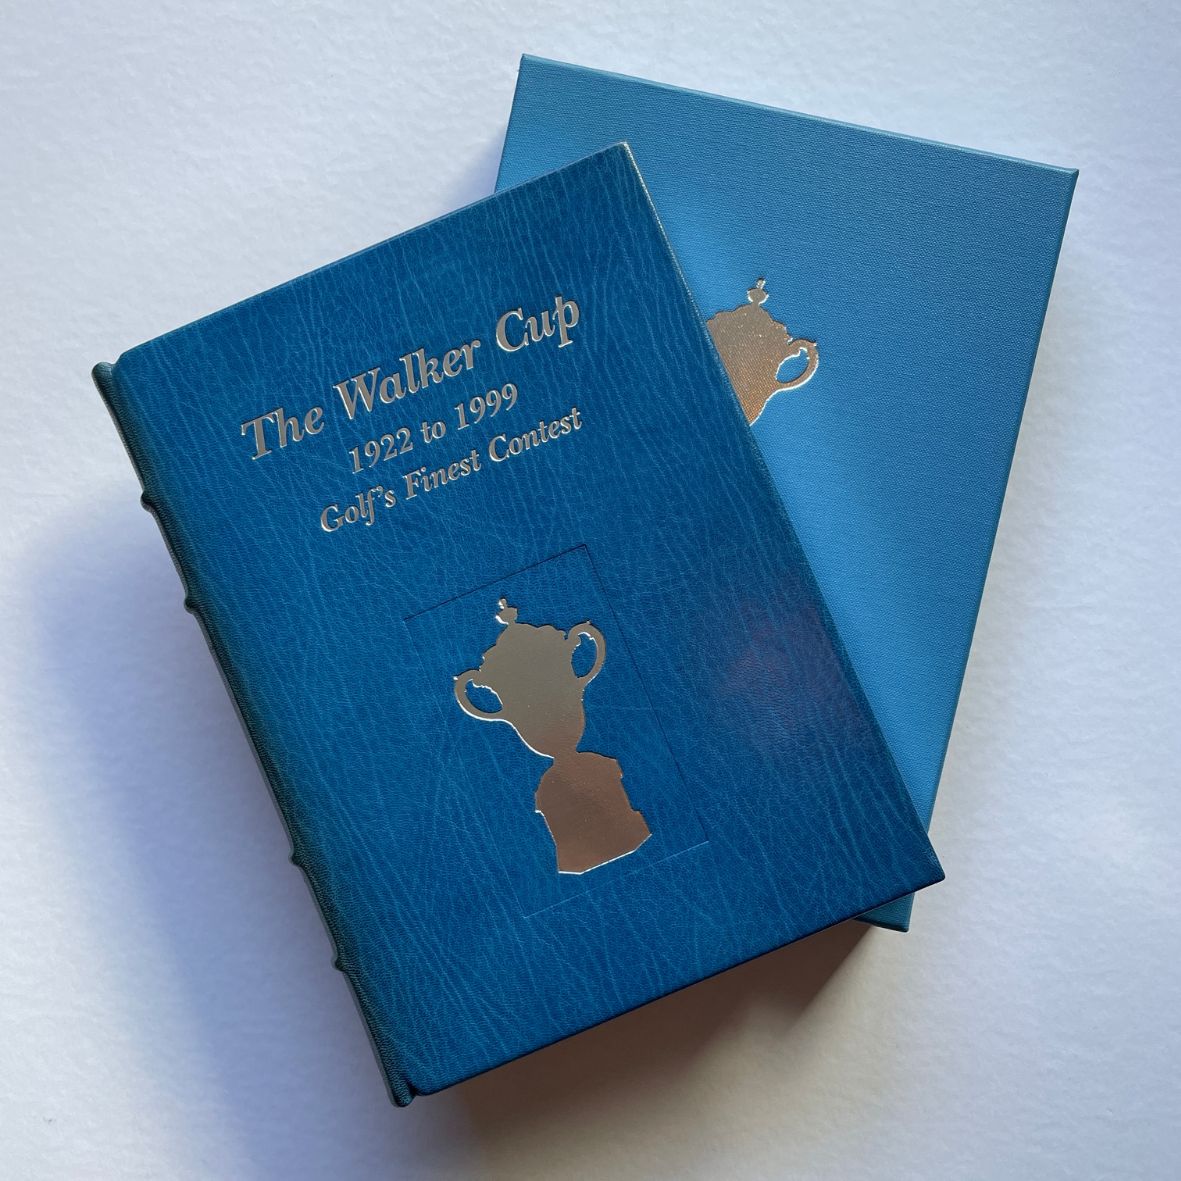 The Walker Cup 1922 to 1999 - Rare Author's Edition, No. 24/200